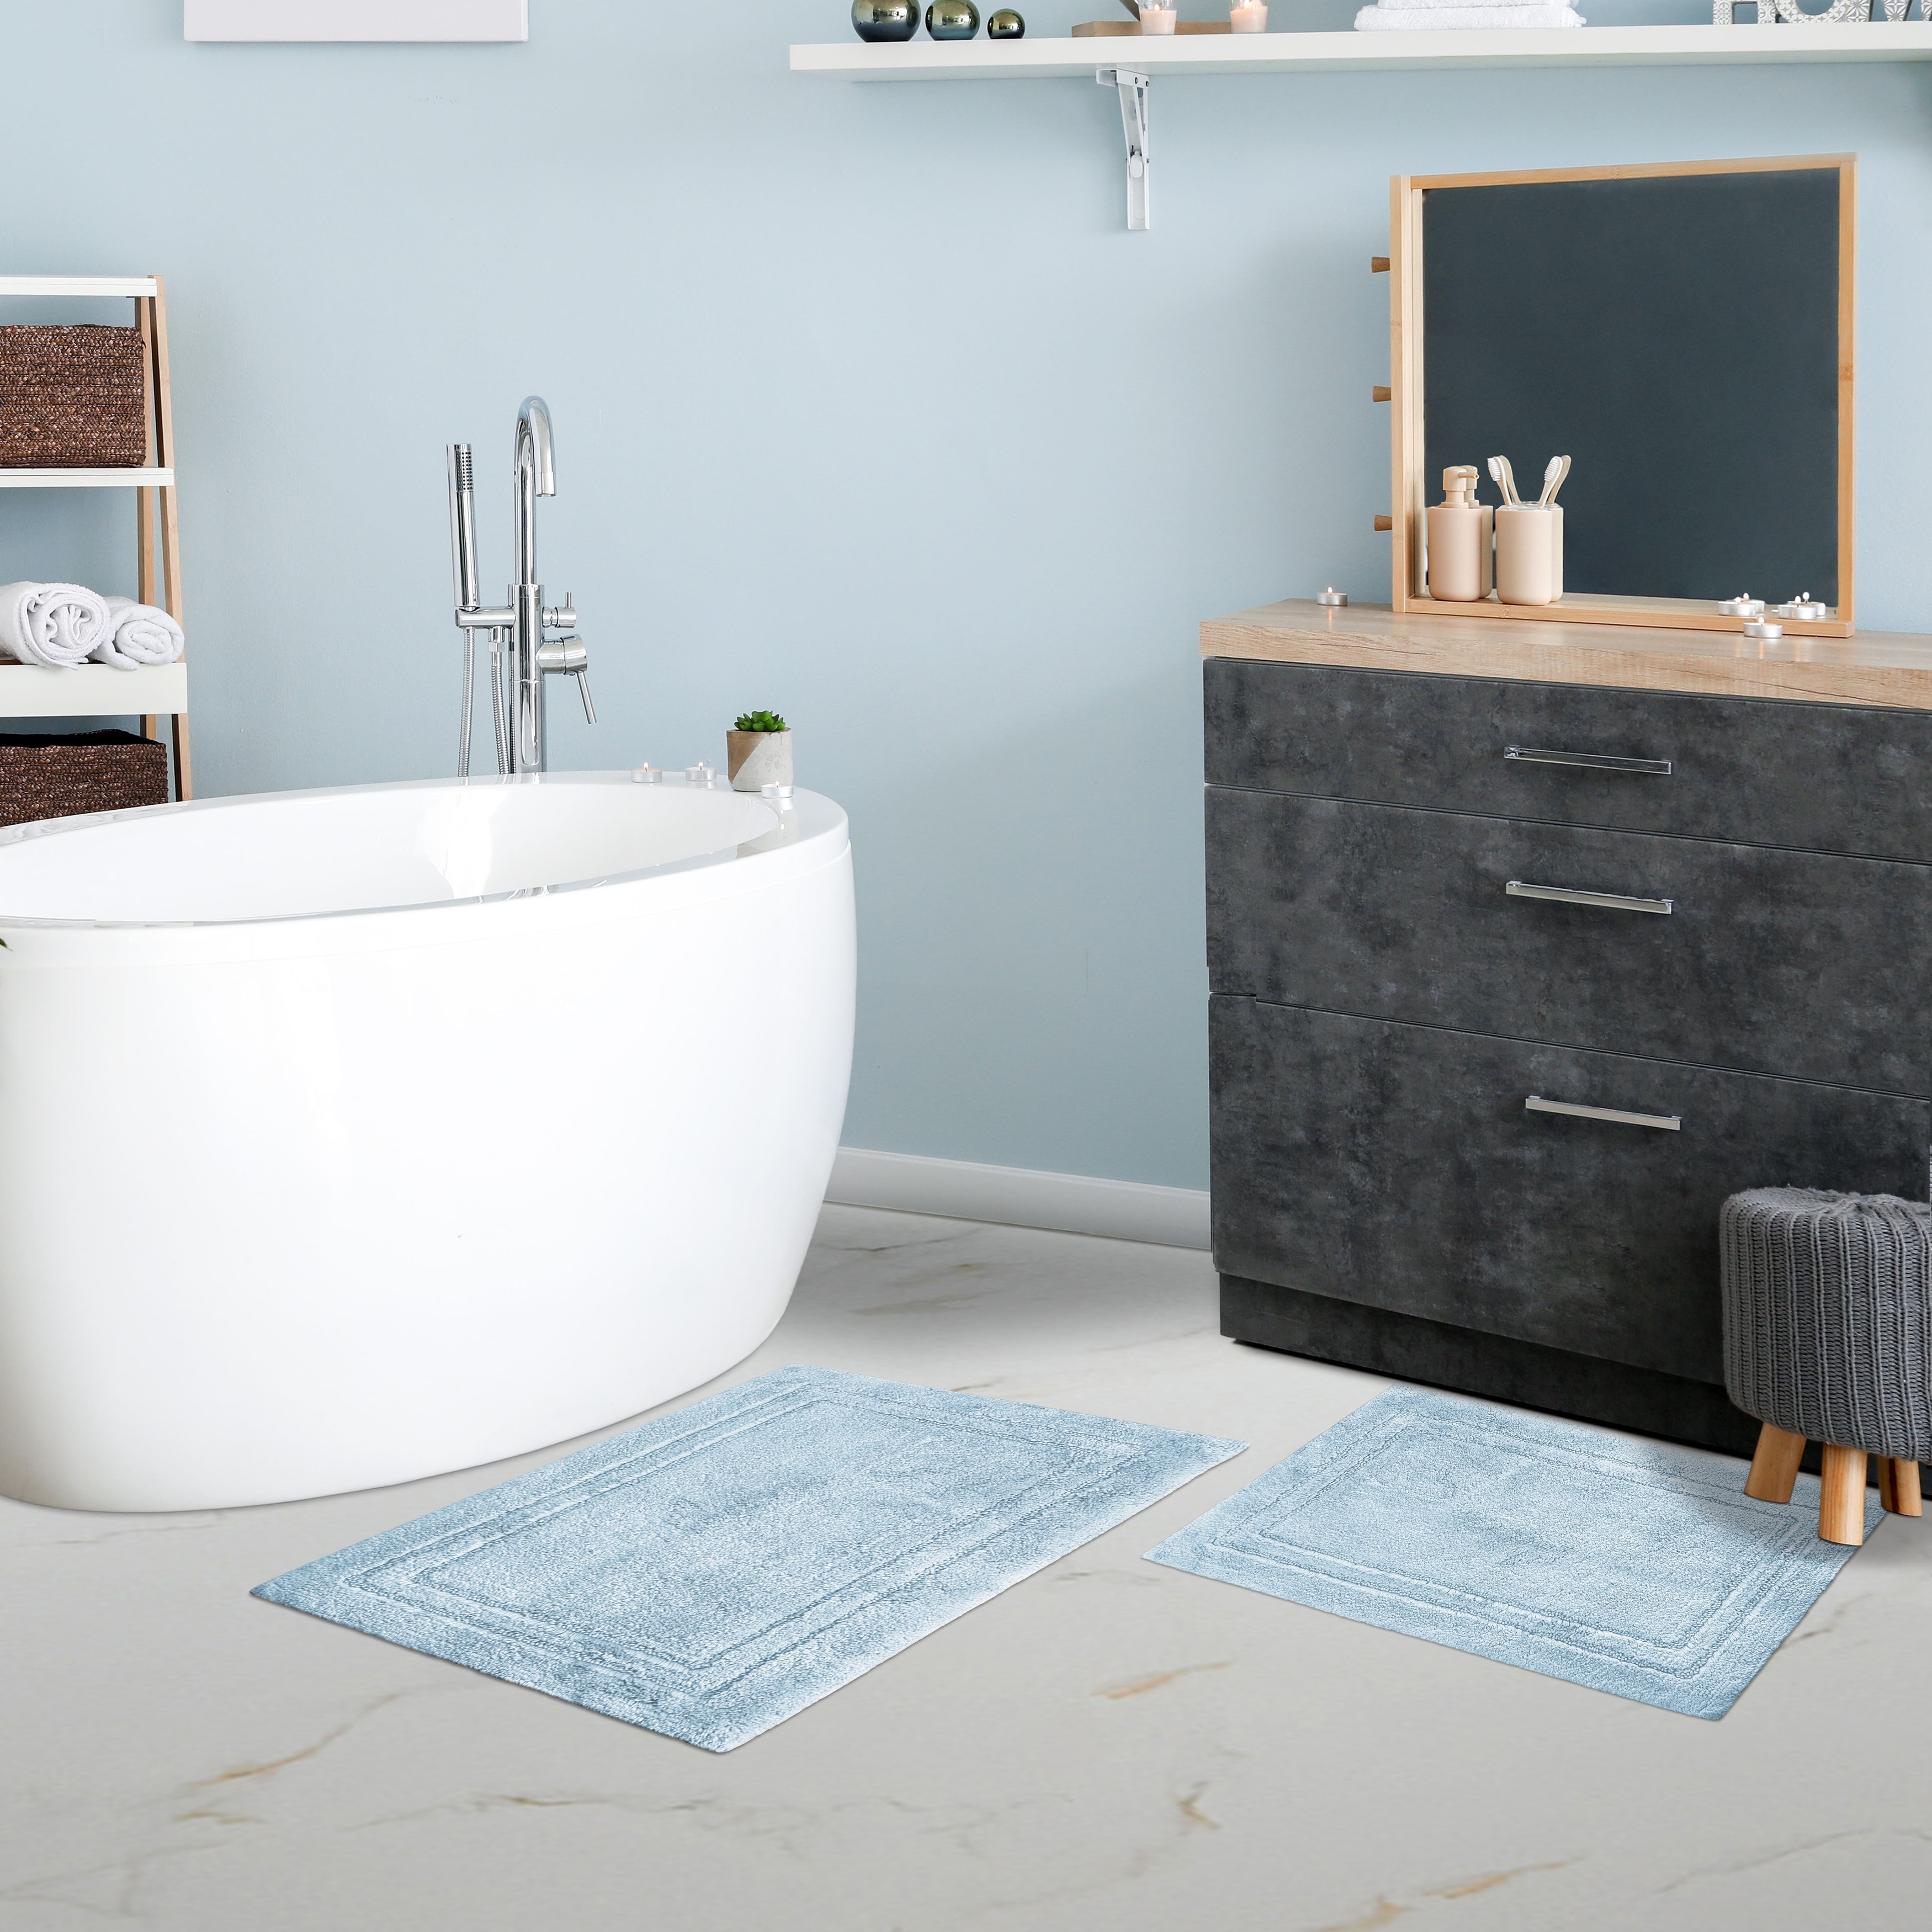 https://ak1.ostkcdn.com/images/products/is/images/direct/eae183ad1ef399f3b6c7c67c1eaf59adec2d9e49/Miranda-Haus-Cotton-Solid-Non-slip-Backing-Bath-Rug-%28Set-of-2%29.jpg